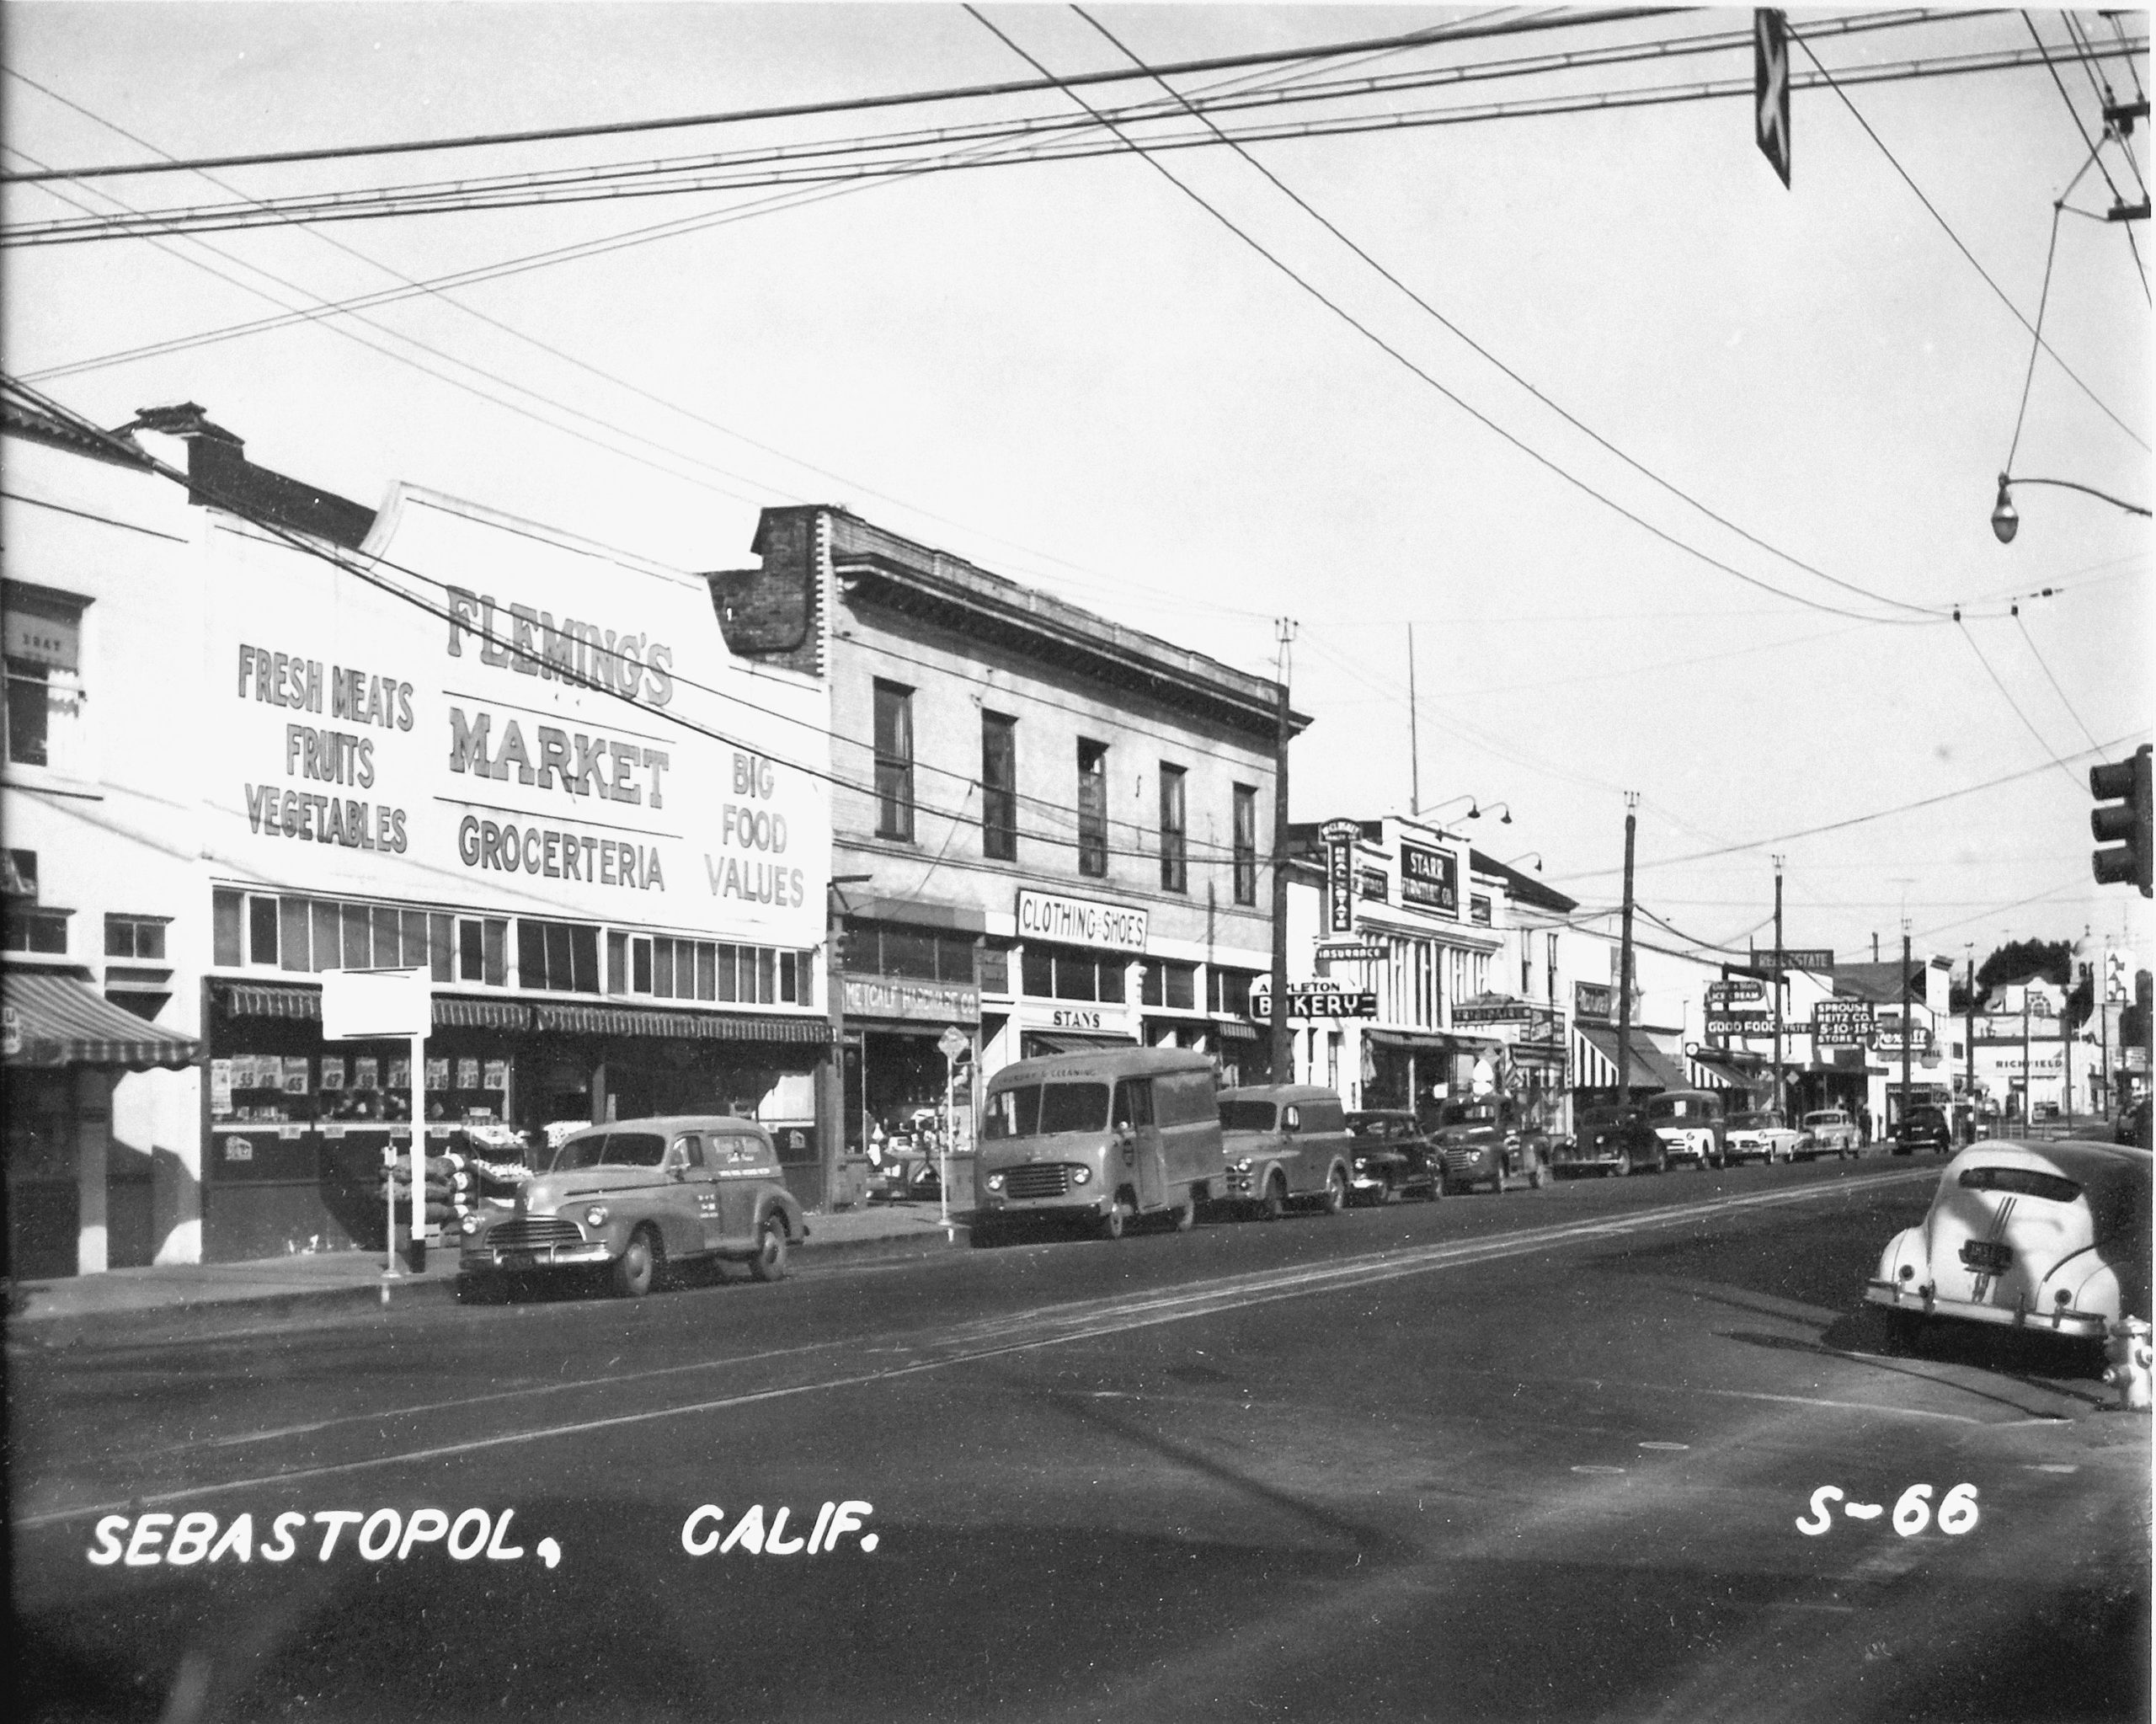 Business on North Main Street, Sebastopol circa 1940. Seen are Fleming’s Market, Metcalf Hardware, Stan’s Clothing Store, Appleton Bakery, Real Estate and Insurance office, Starr Furniture, Sprouse Reitz, and Rexall Drug Store.